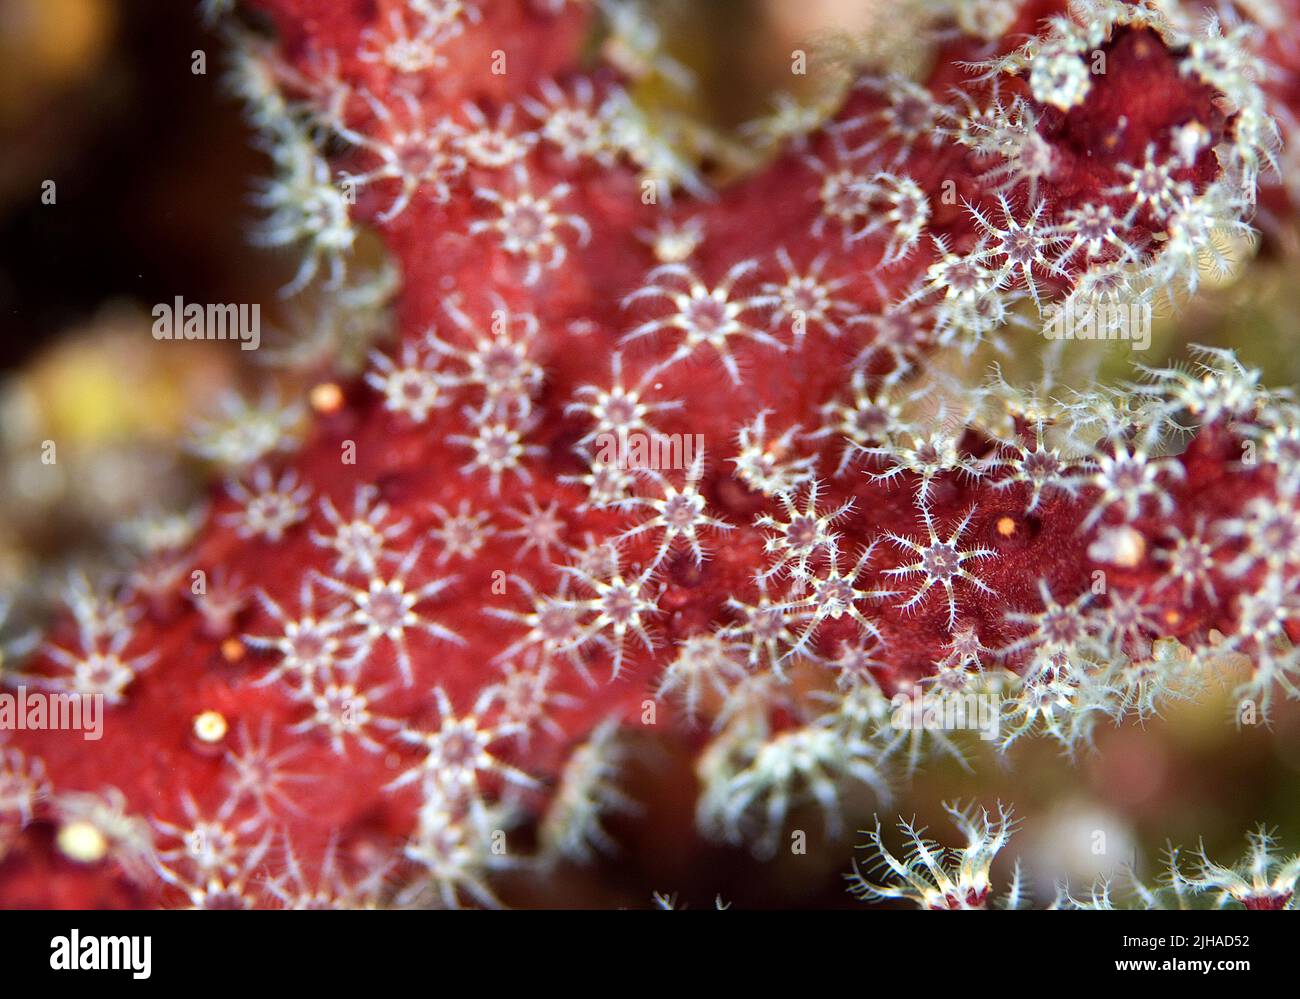 Red Dead Man's Fingers - Alcyonium palmatum, beautiful red soft coral from the Mediterranean sea reefs, Pag island, Croatia. Stock Photo